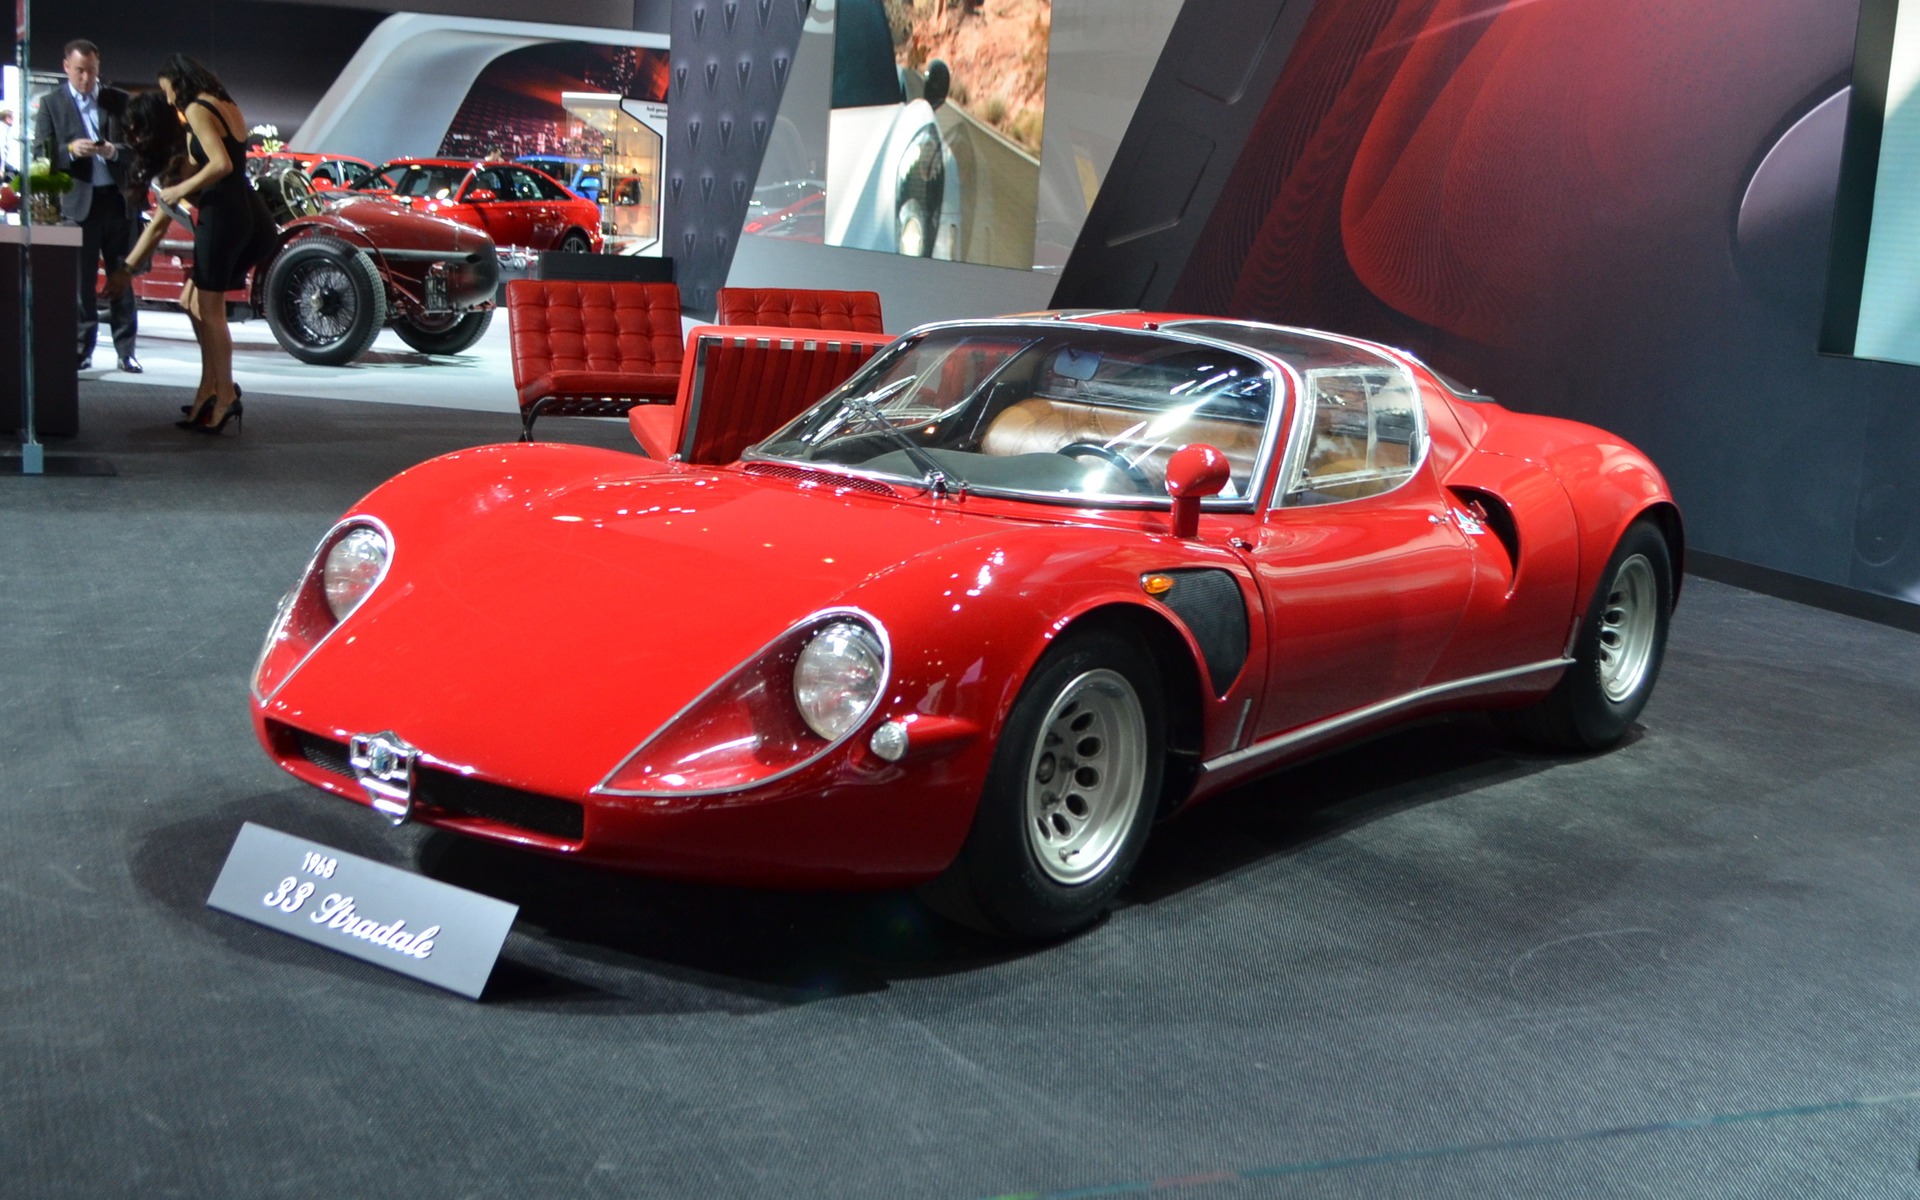 1968 Alfa Romeo 33 Stradale, the inspiration for the current 4C.